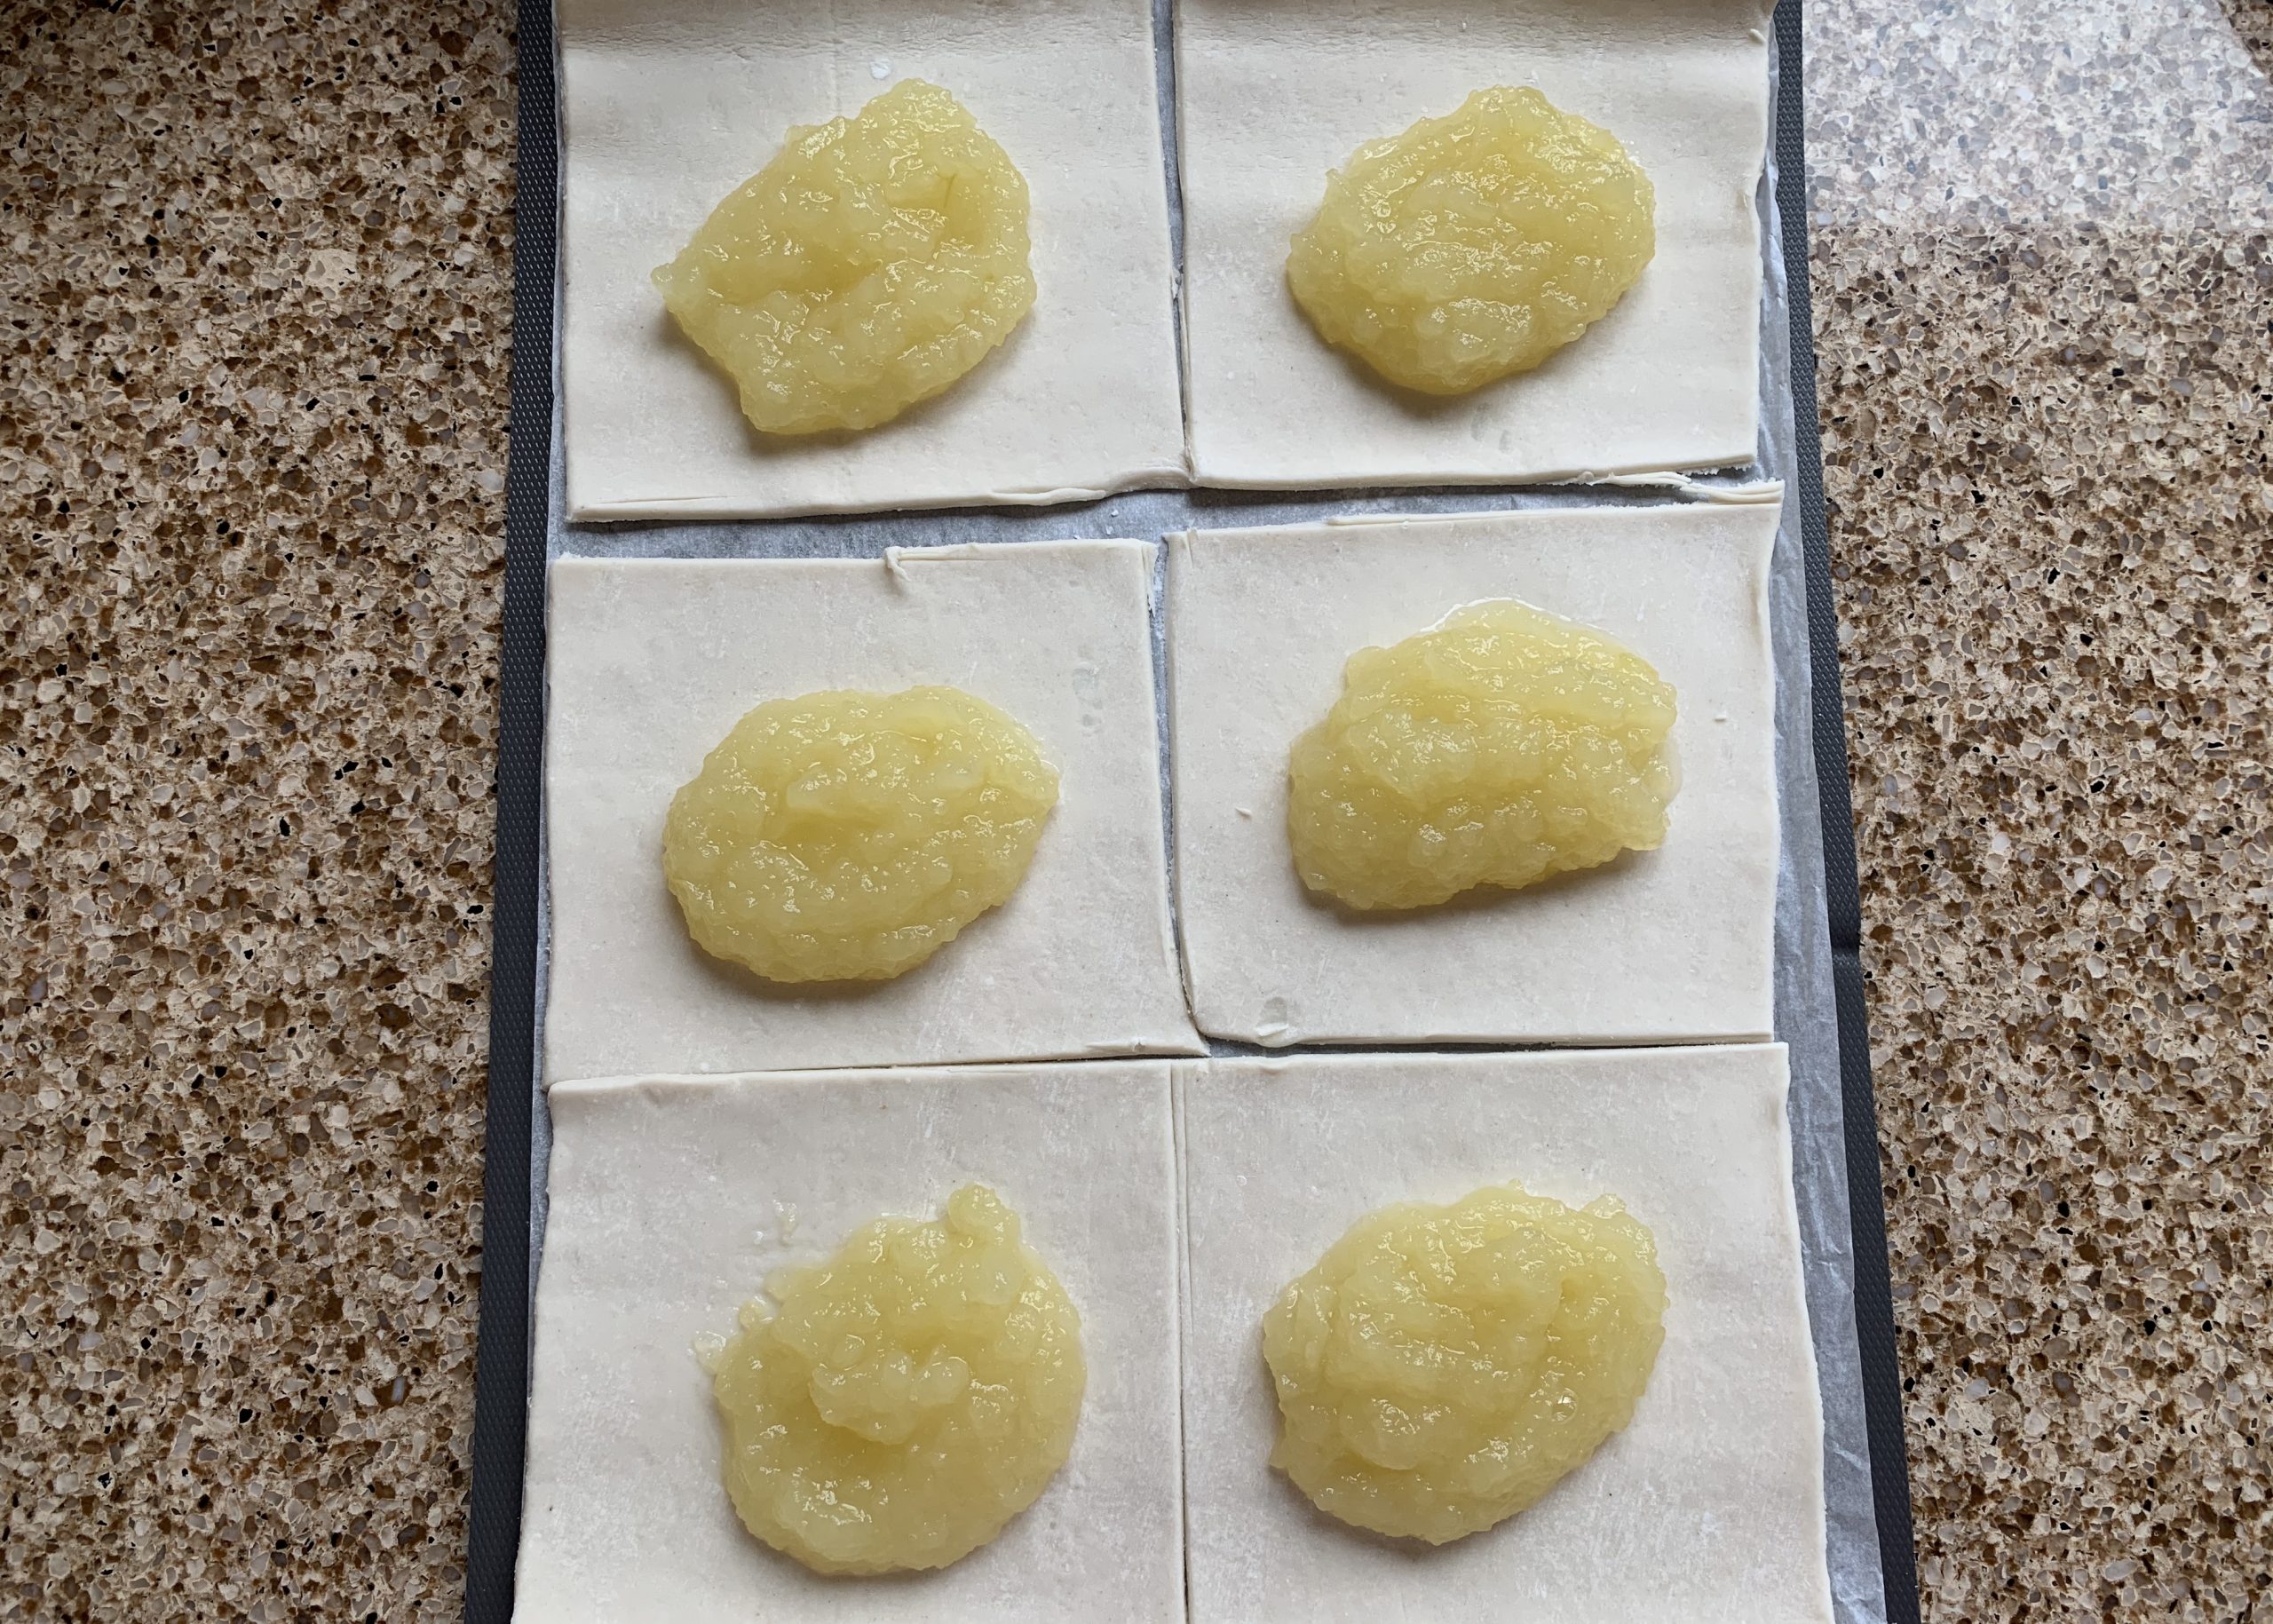 Process of making gluten free apple turnovers